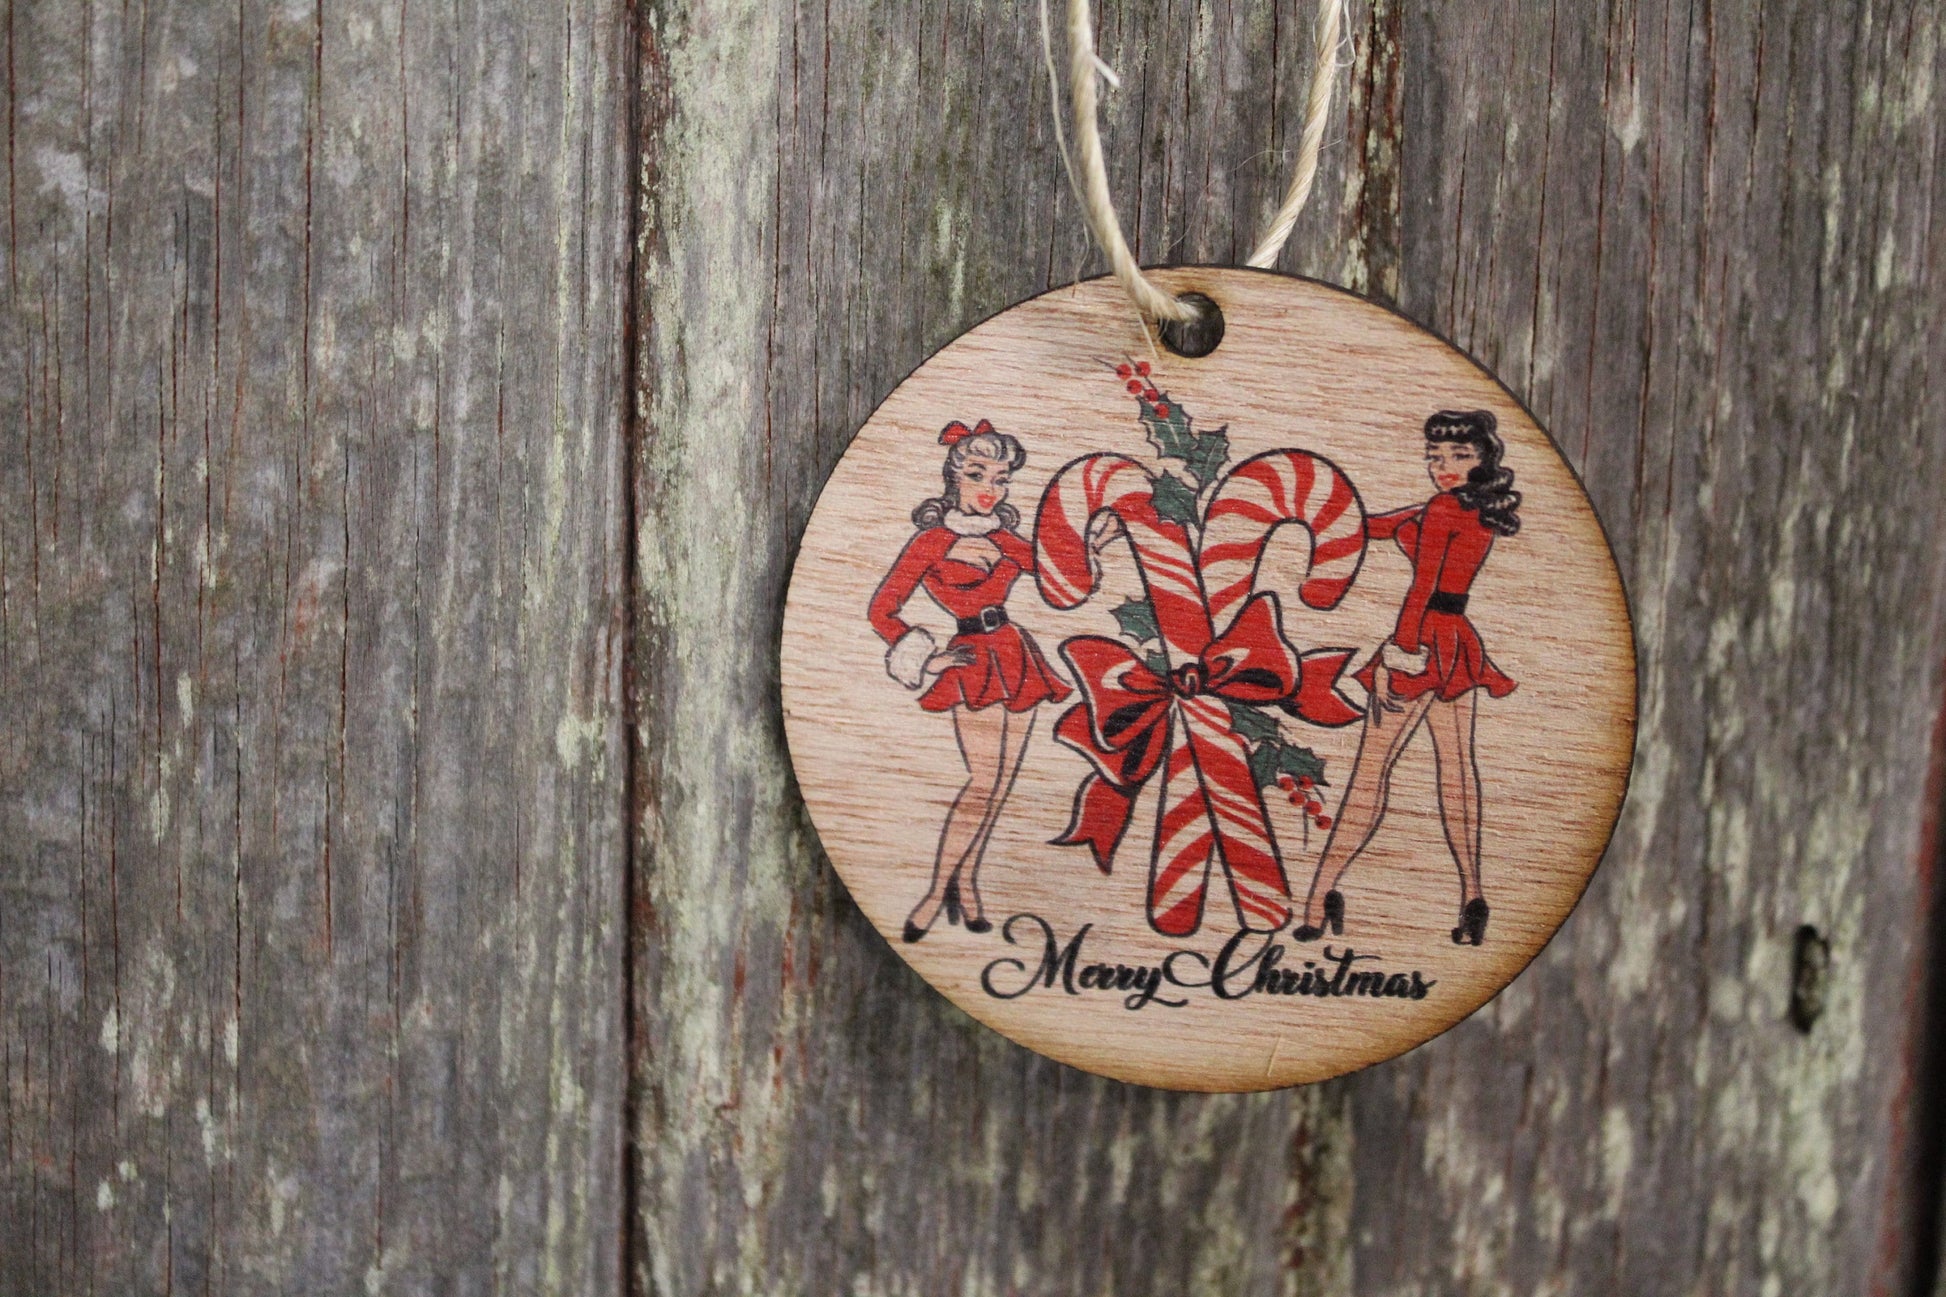 Ornament Retro Pin Up Girls Christmas Ladies Merry Christmas Script Text Candy Canes Wall Hanging Tree Rustic Farmhouse Wood